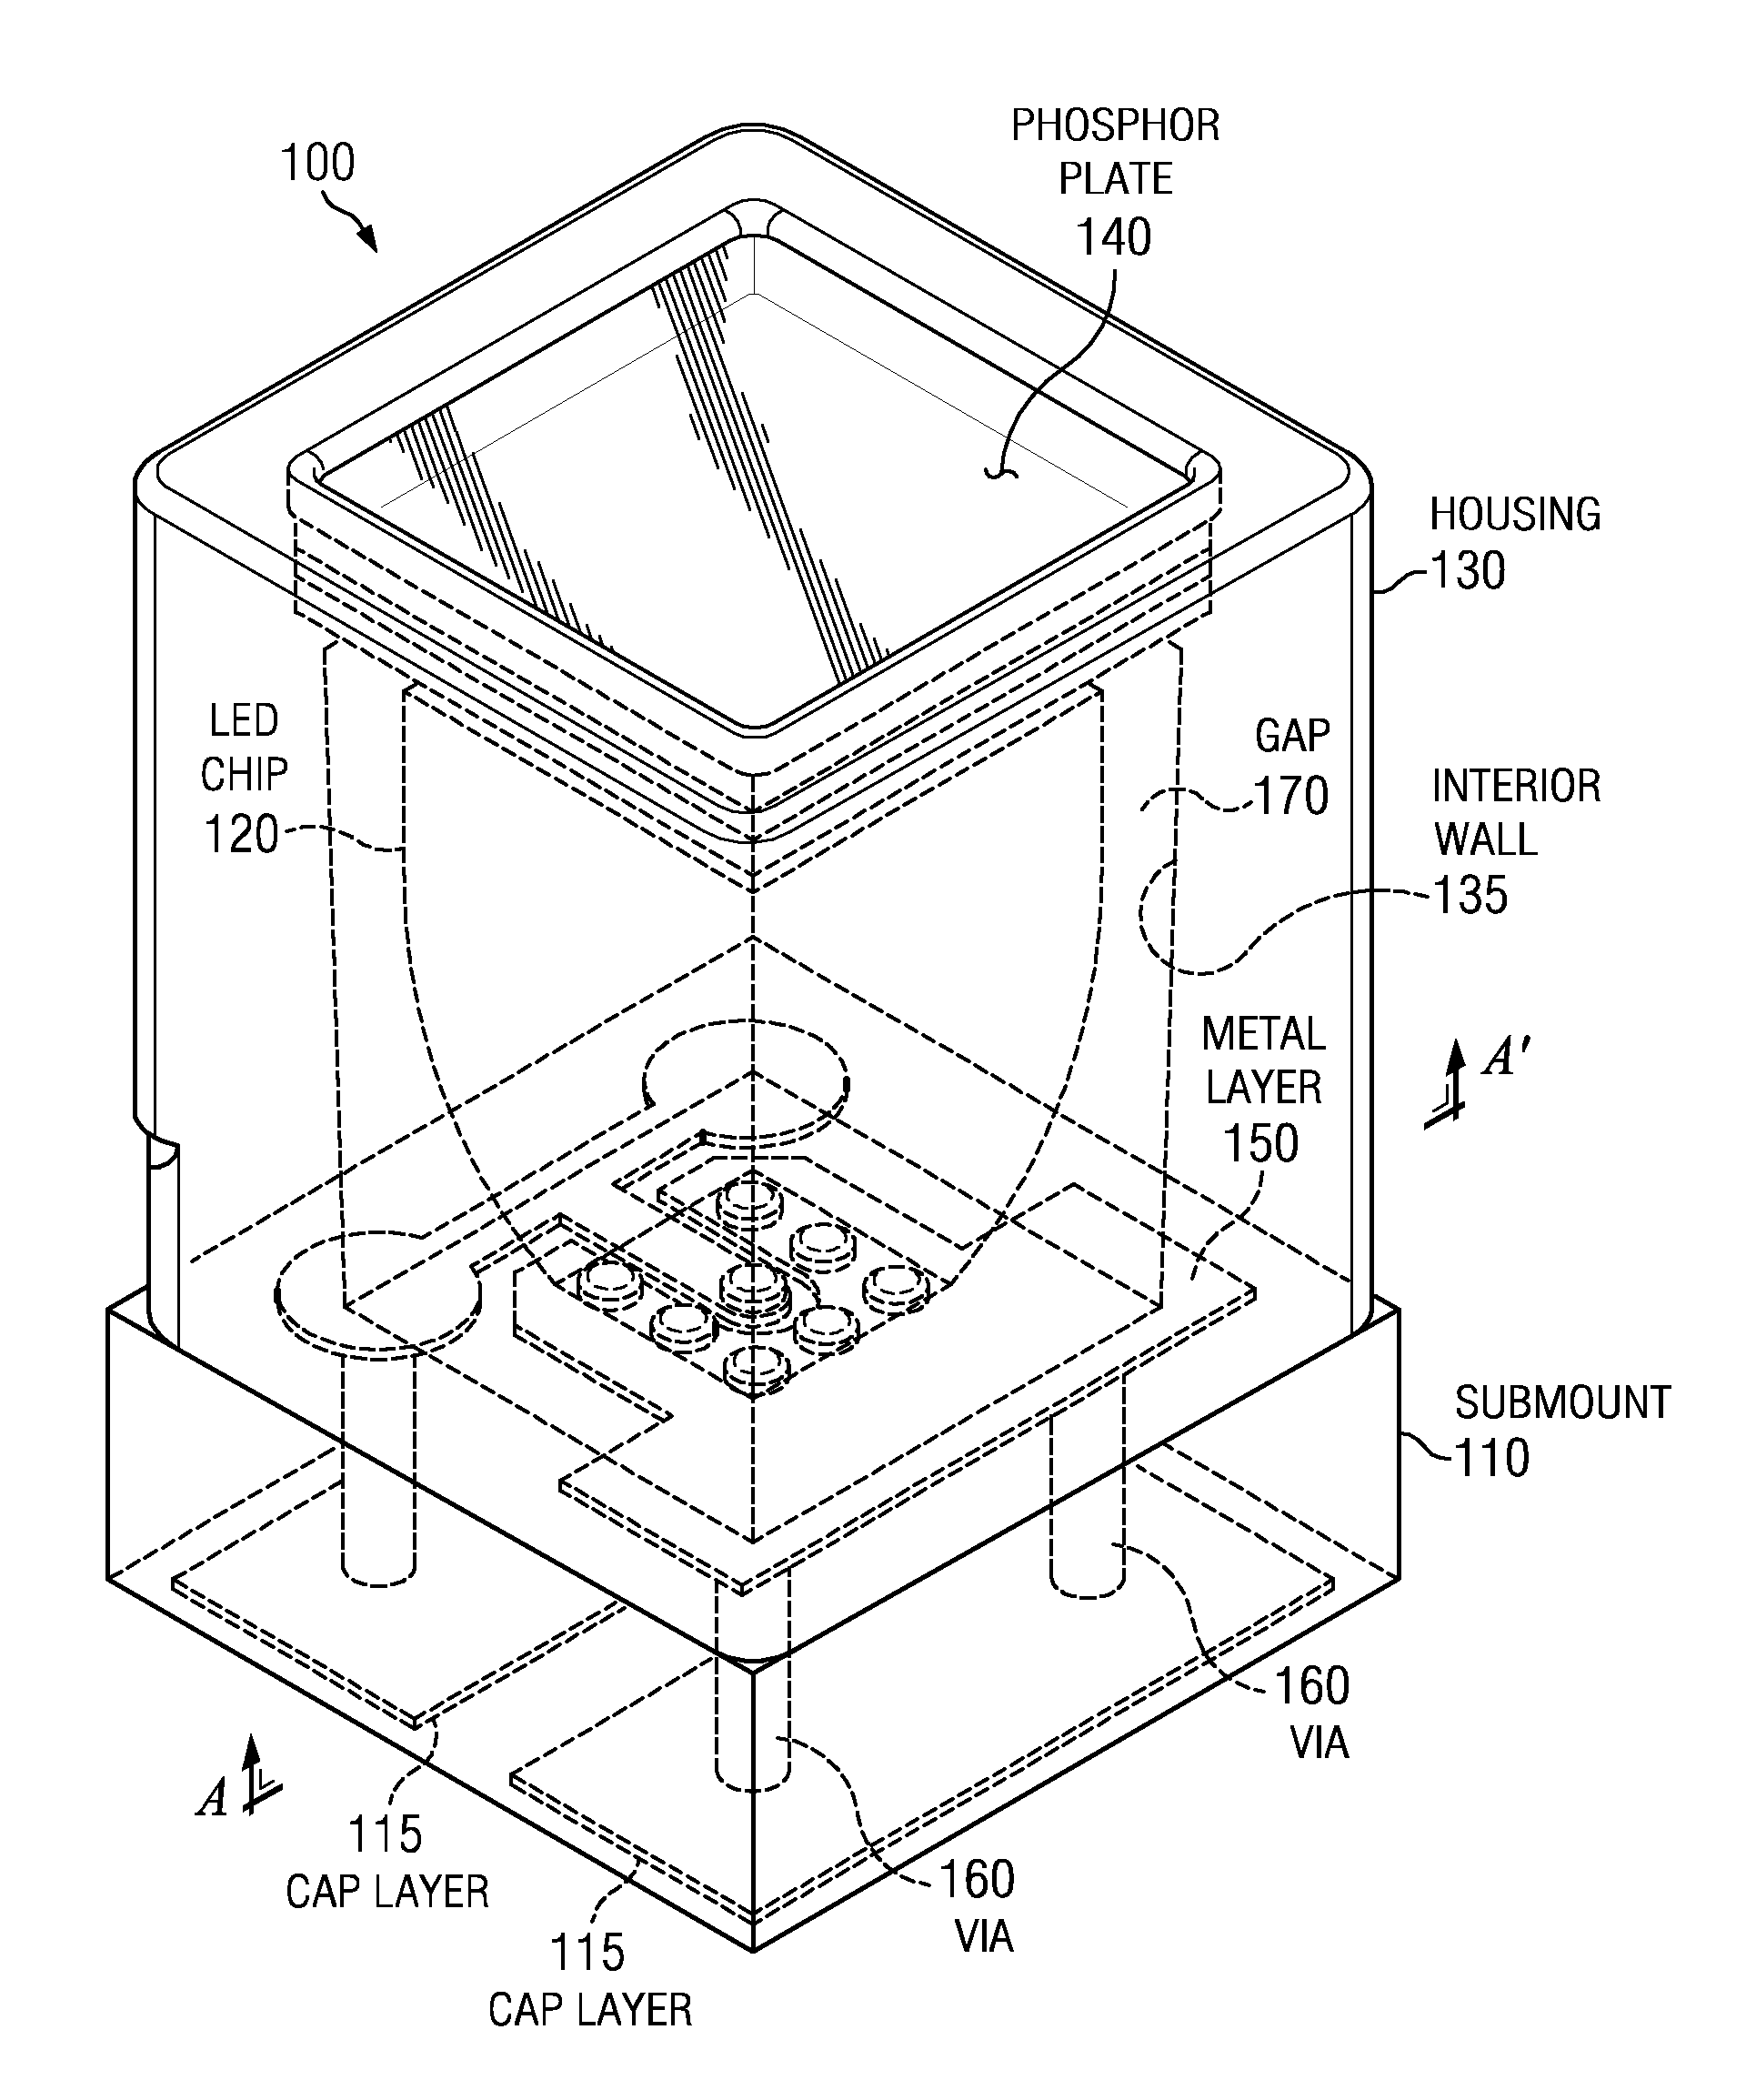 Systems and methods for packaging light-emitting diode devices